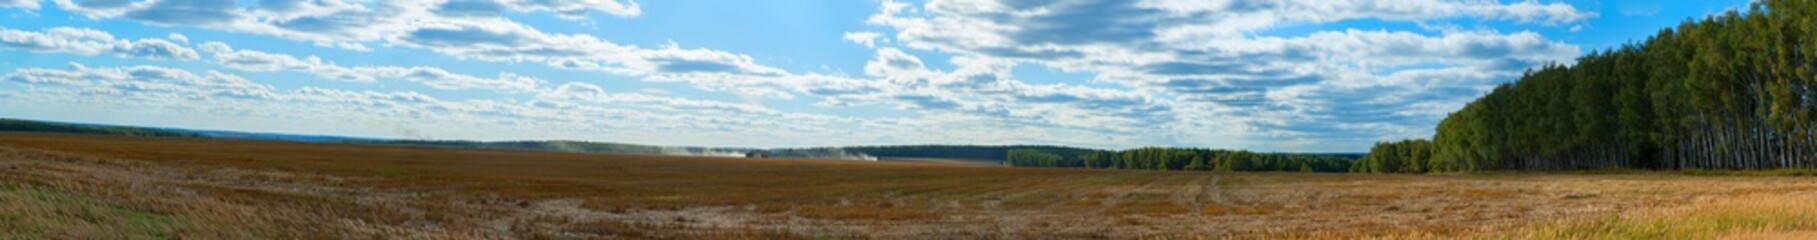 panorama of harvested wheat field in Russia (Moscow region)